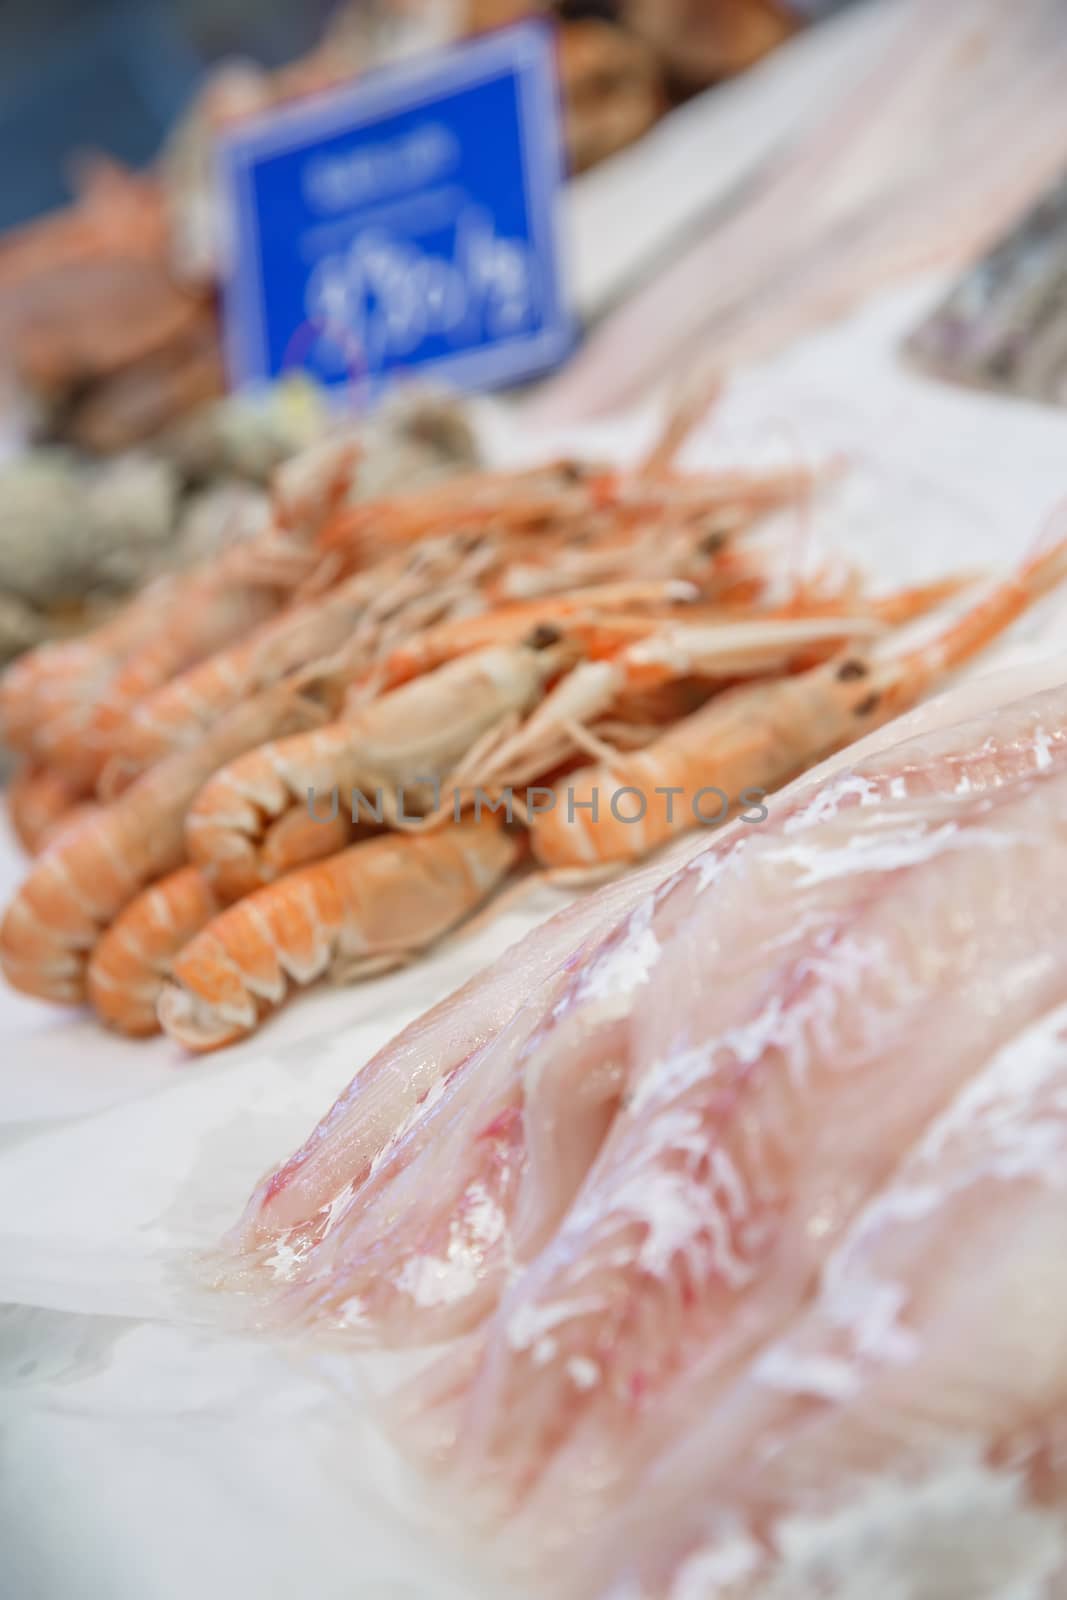 Fresh cod fillet and lobsters on ice for sale at market